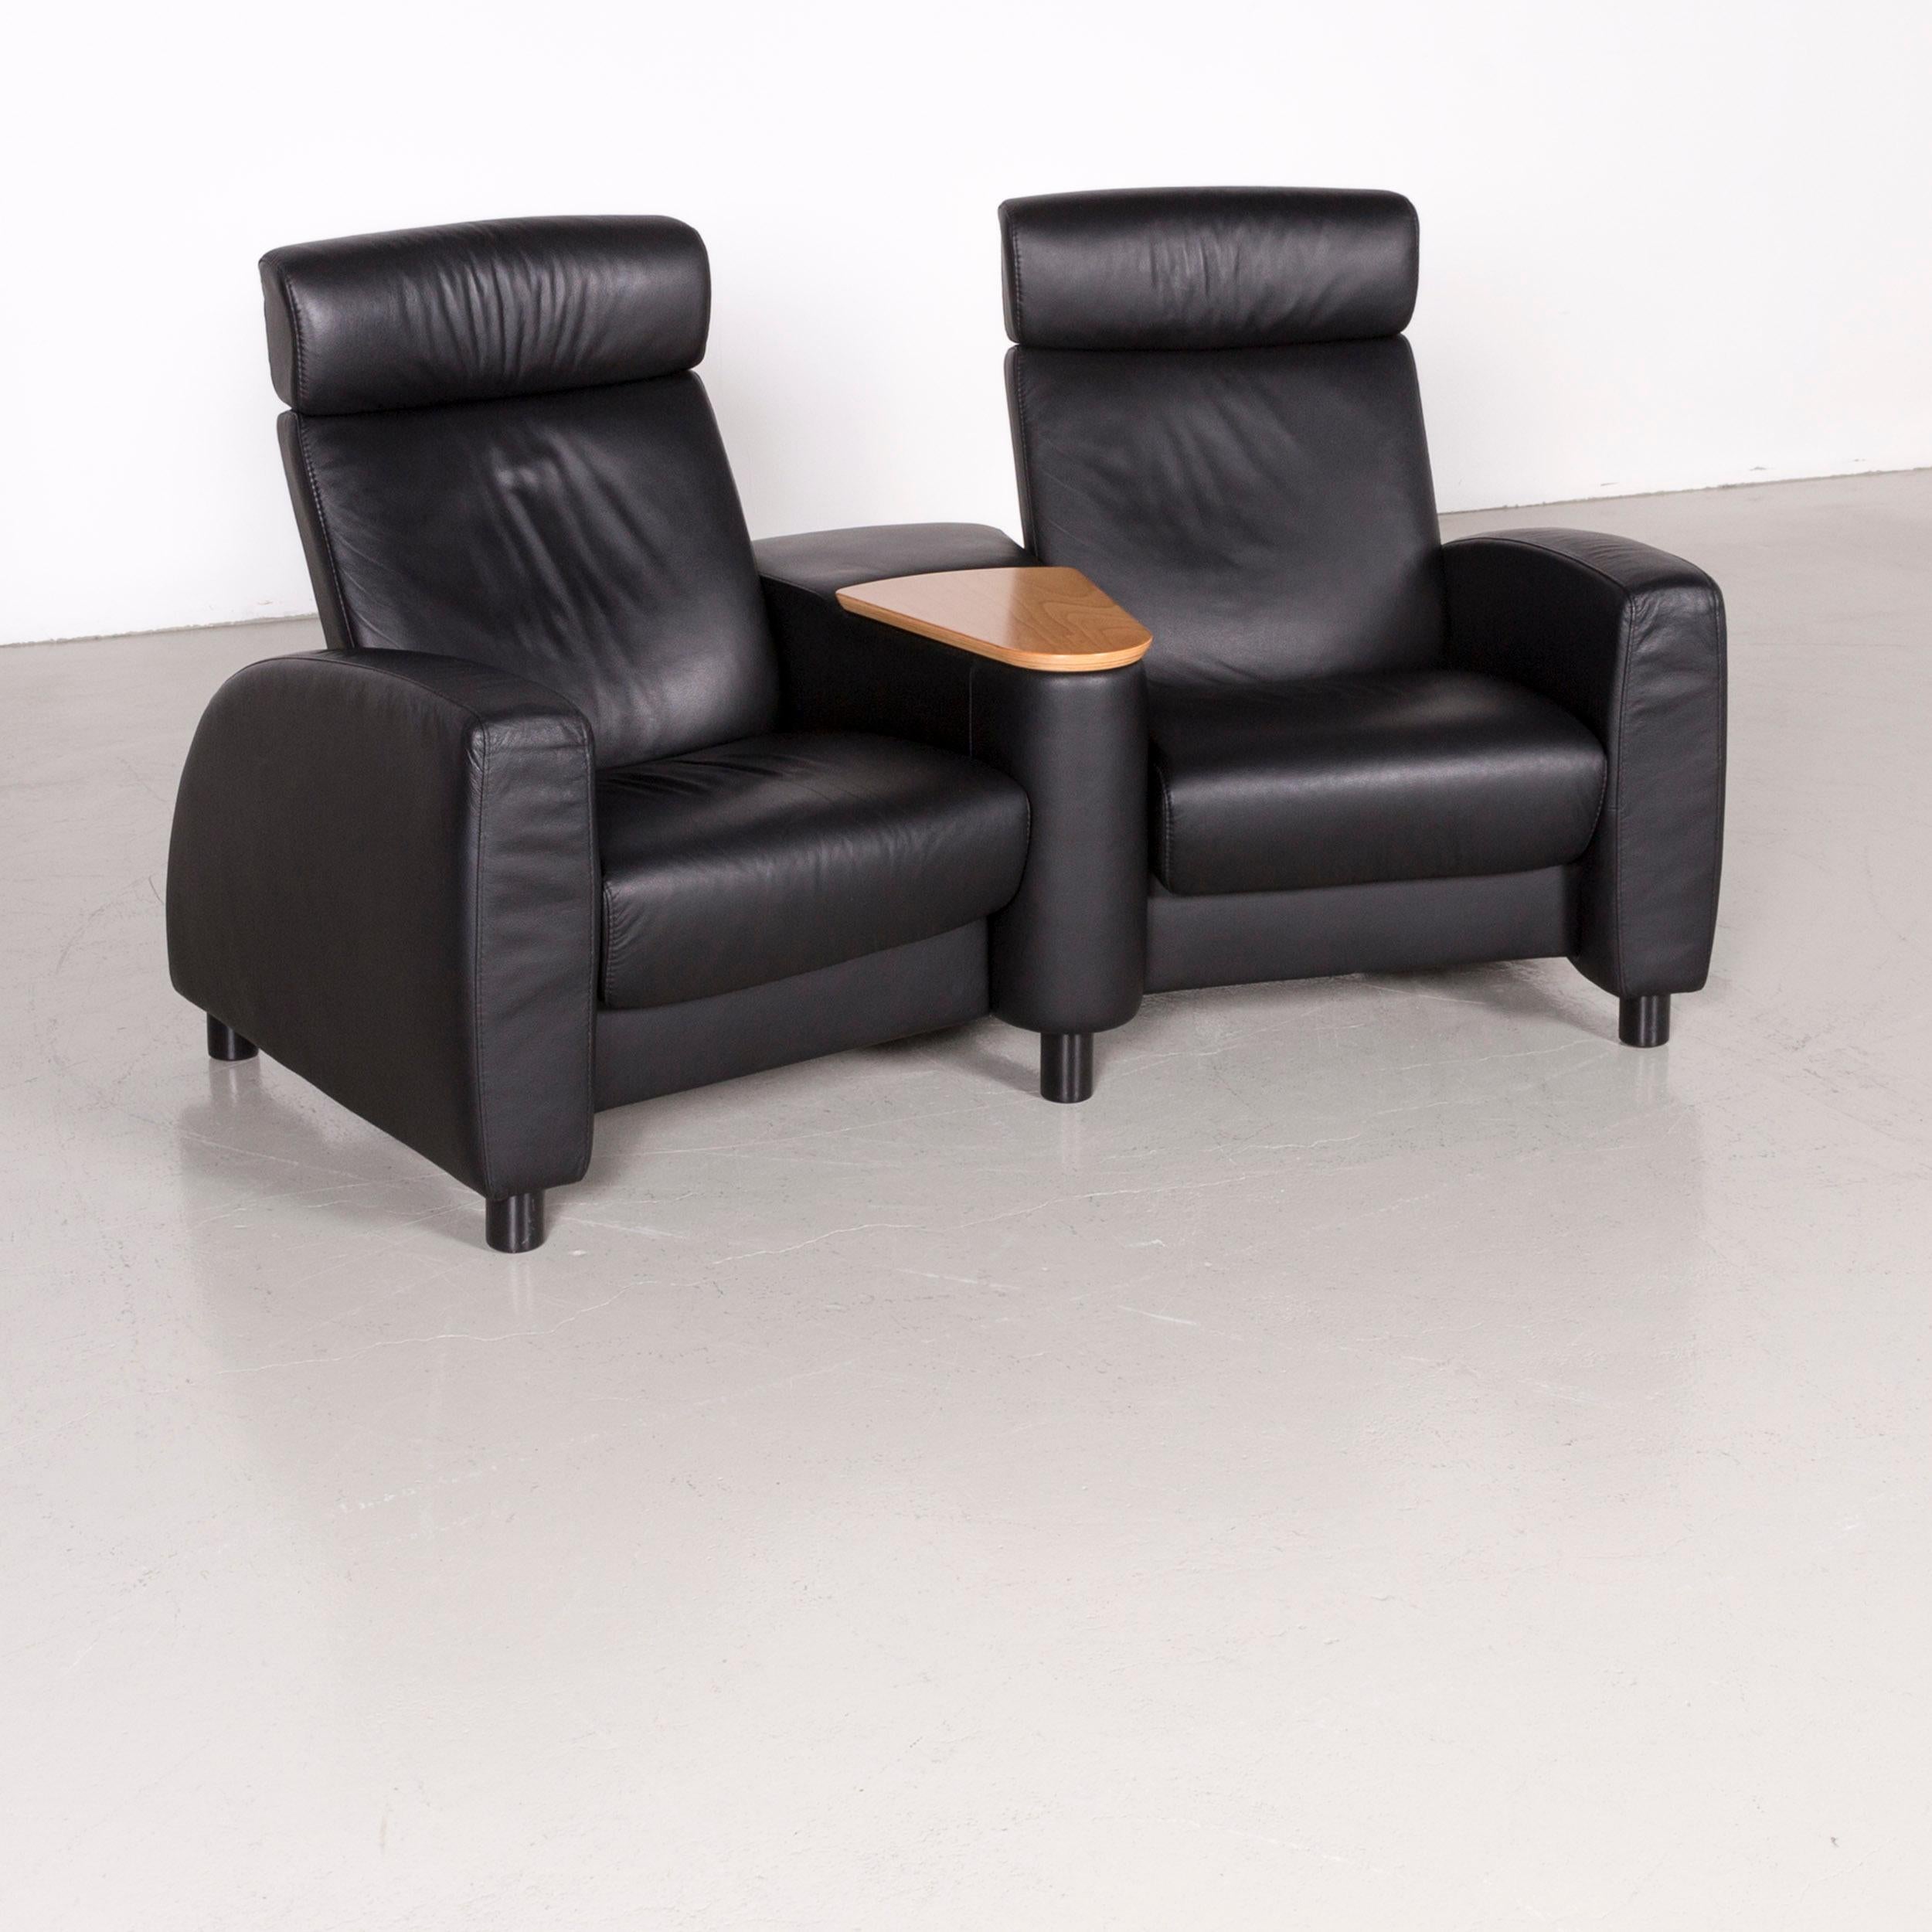 Ekornes Stressless Arion sofa black leather four-seat couch with function.